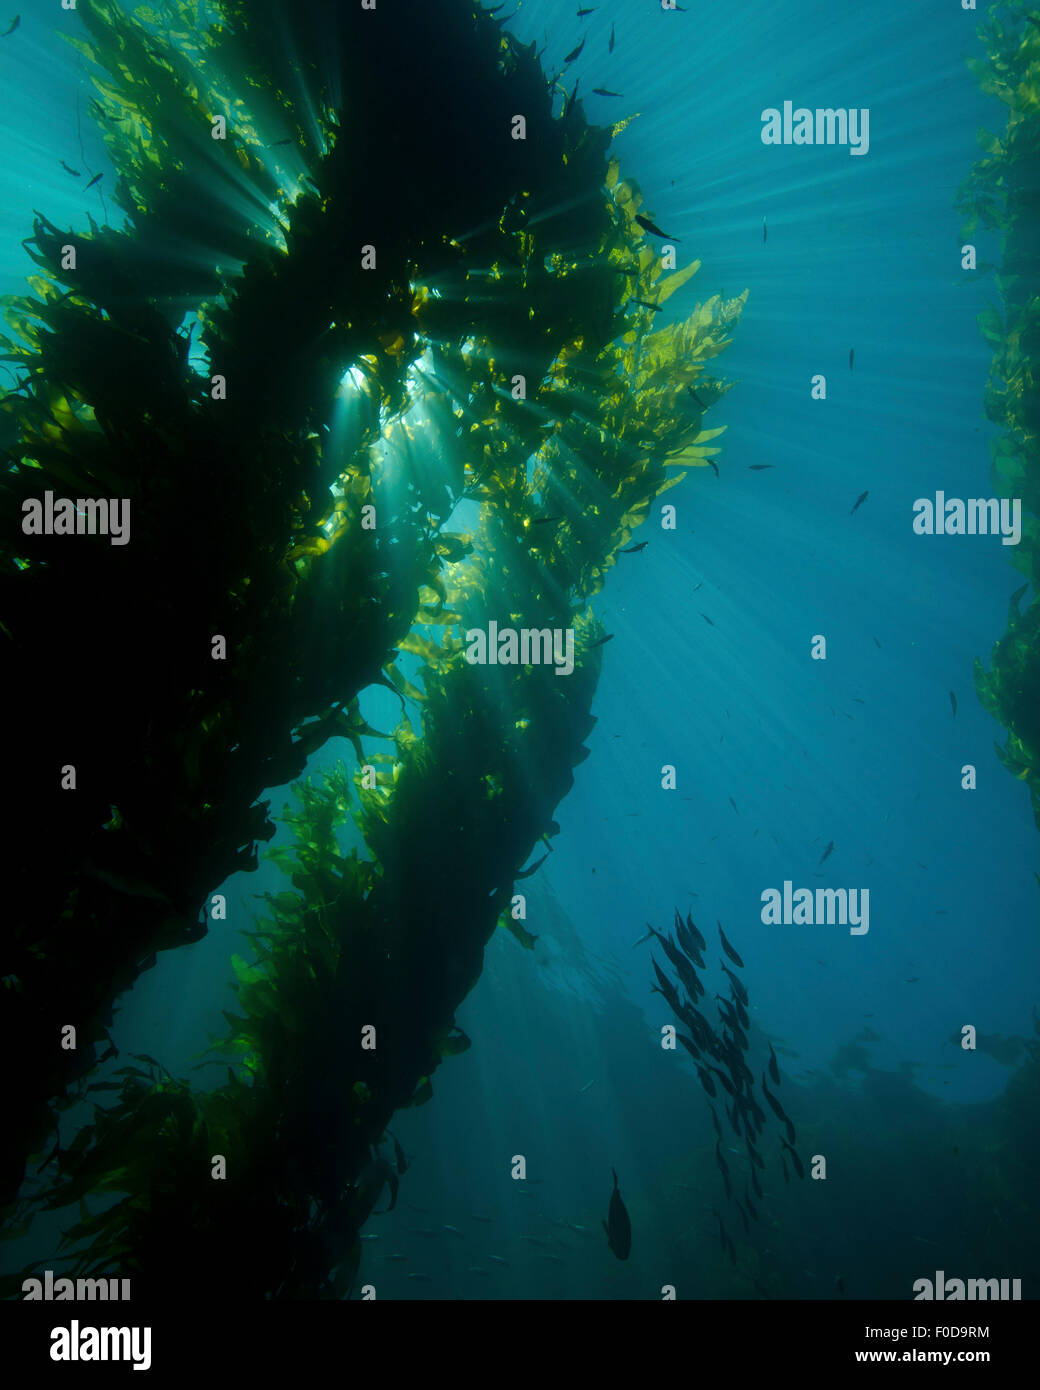 Kelp forest with school of fish, Catalina Island, California. Stock Photo